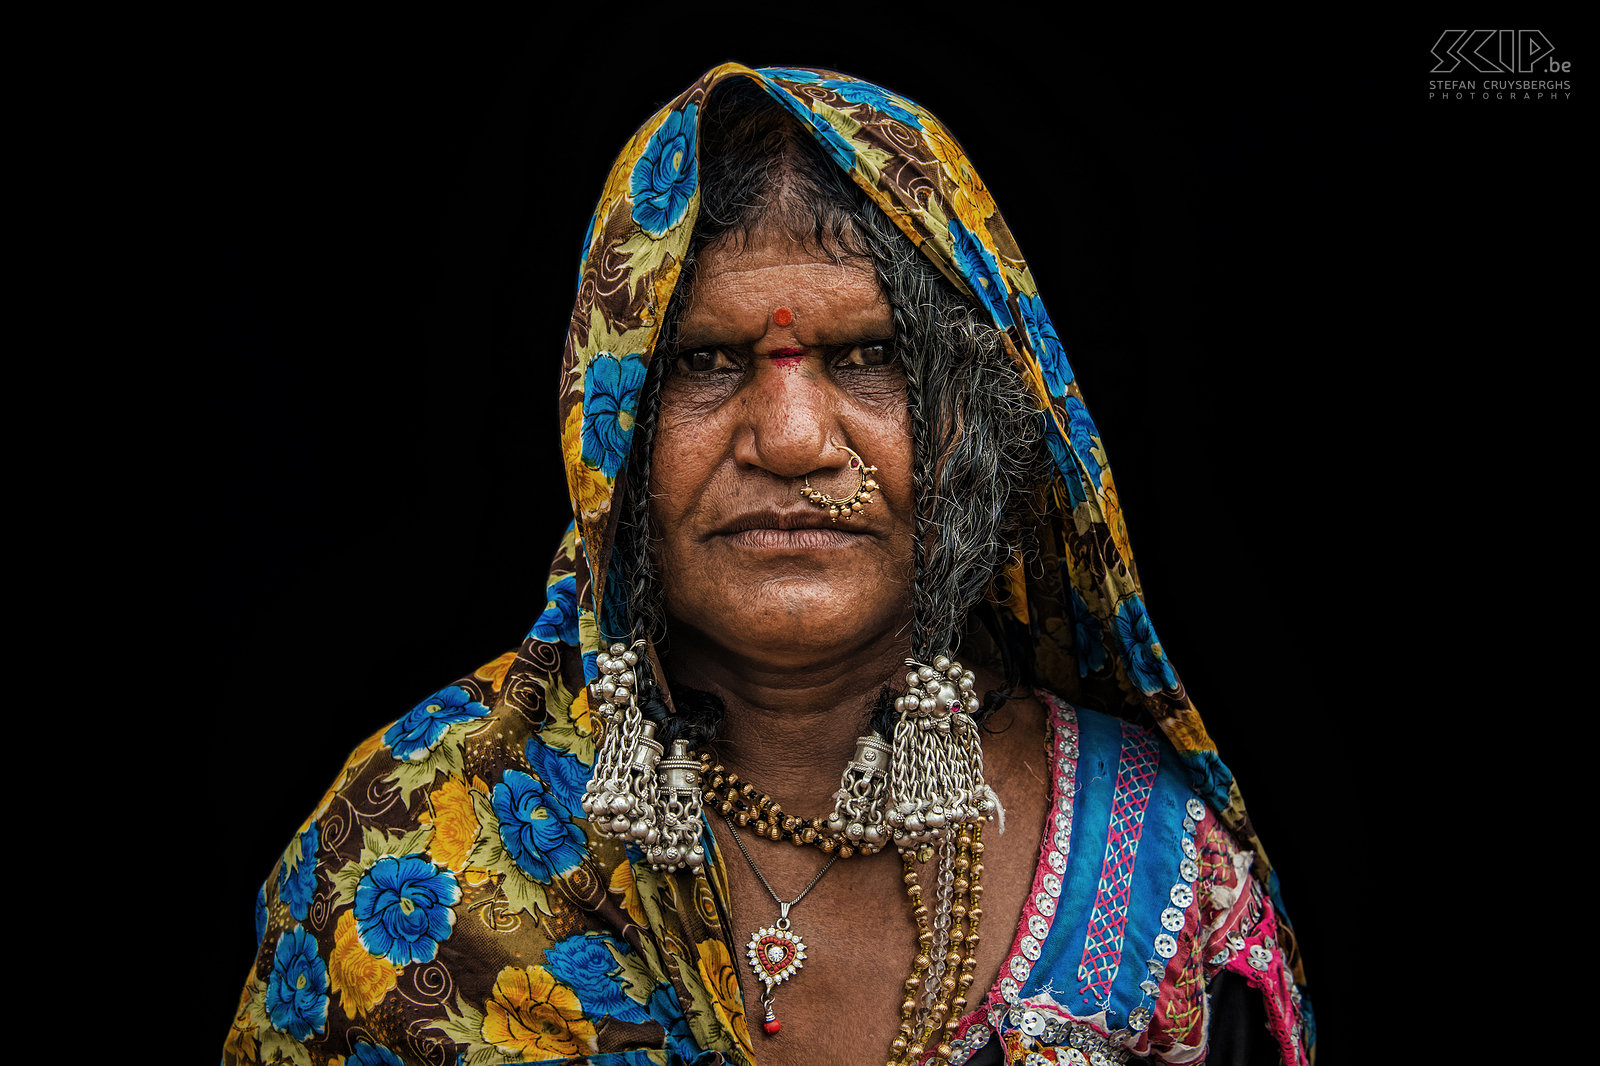 Banjara woman The Banjara or Lambani are nomadic are the largest gypsy group in India. The women make intricately embroidered colourful clothes with pieces of mirror, decorative beads and old coins.  They also wear ornate jewellery and some of them have tattoos. I photographed some Banjara women on different locations in the state of Karnataka in southern India. Stefan Cruysberghs